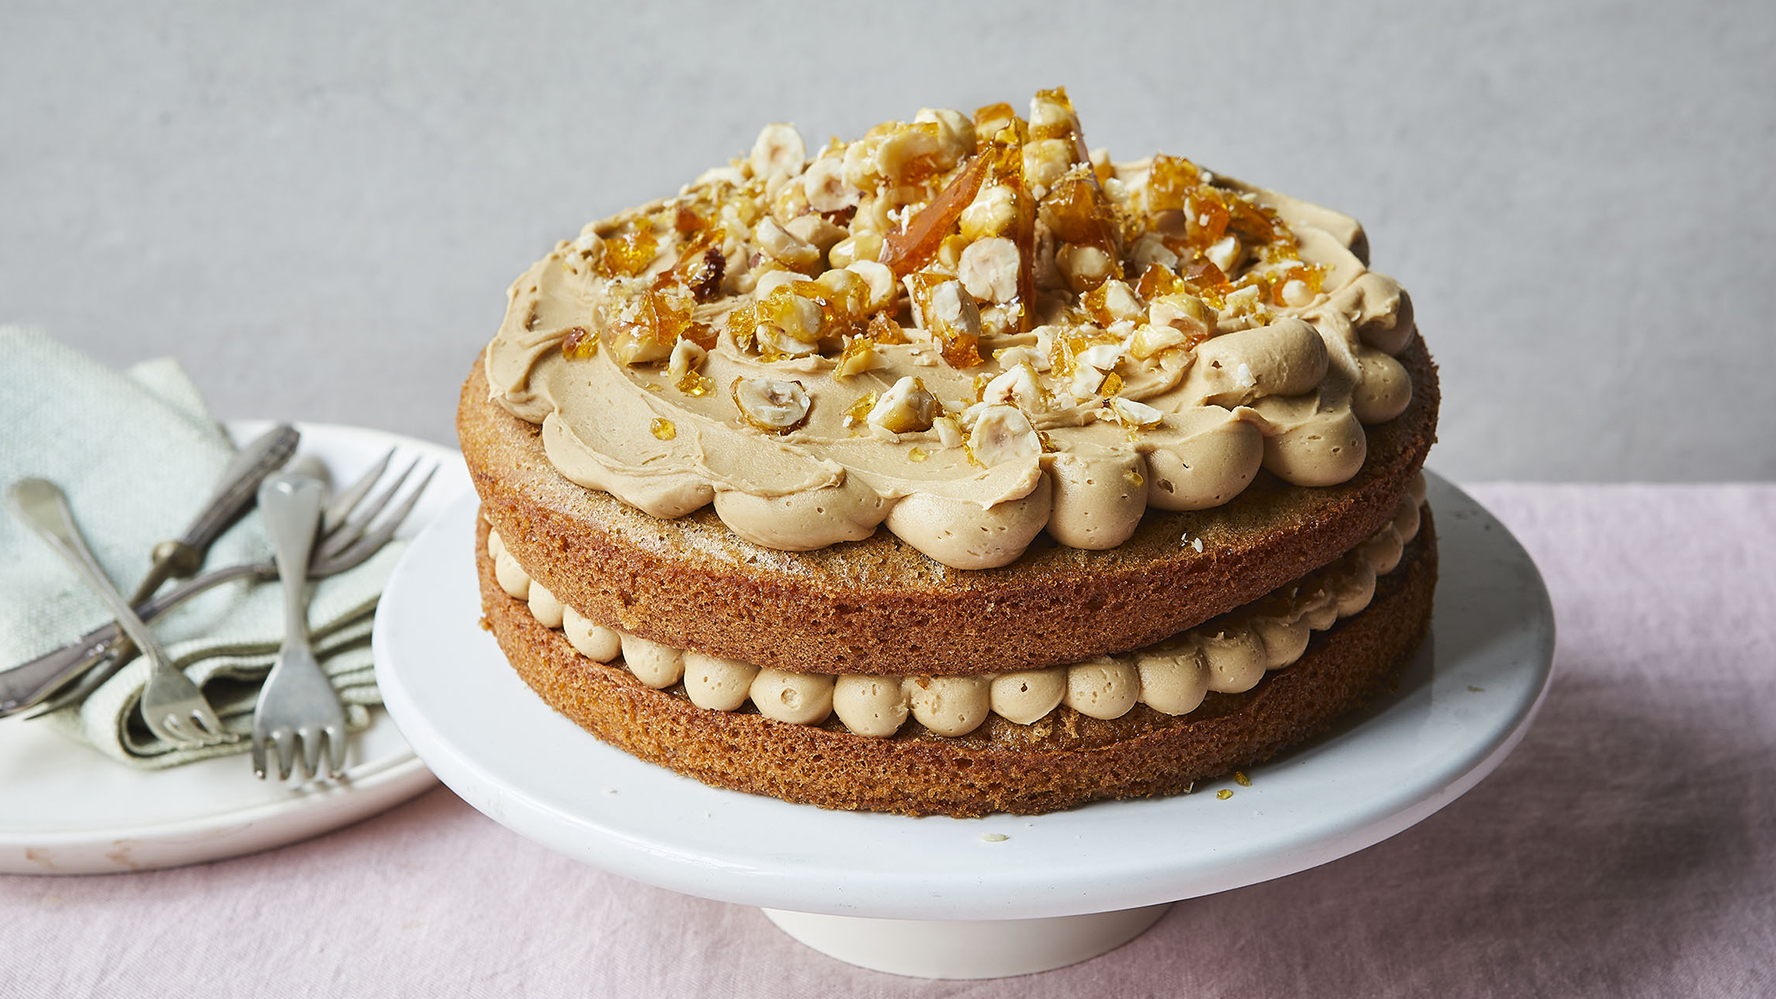 Almond praline cake | Out of the Ordinary